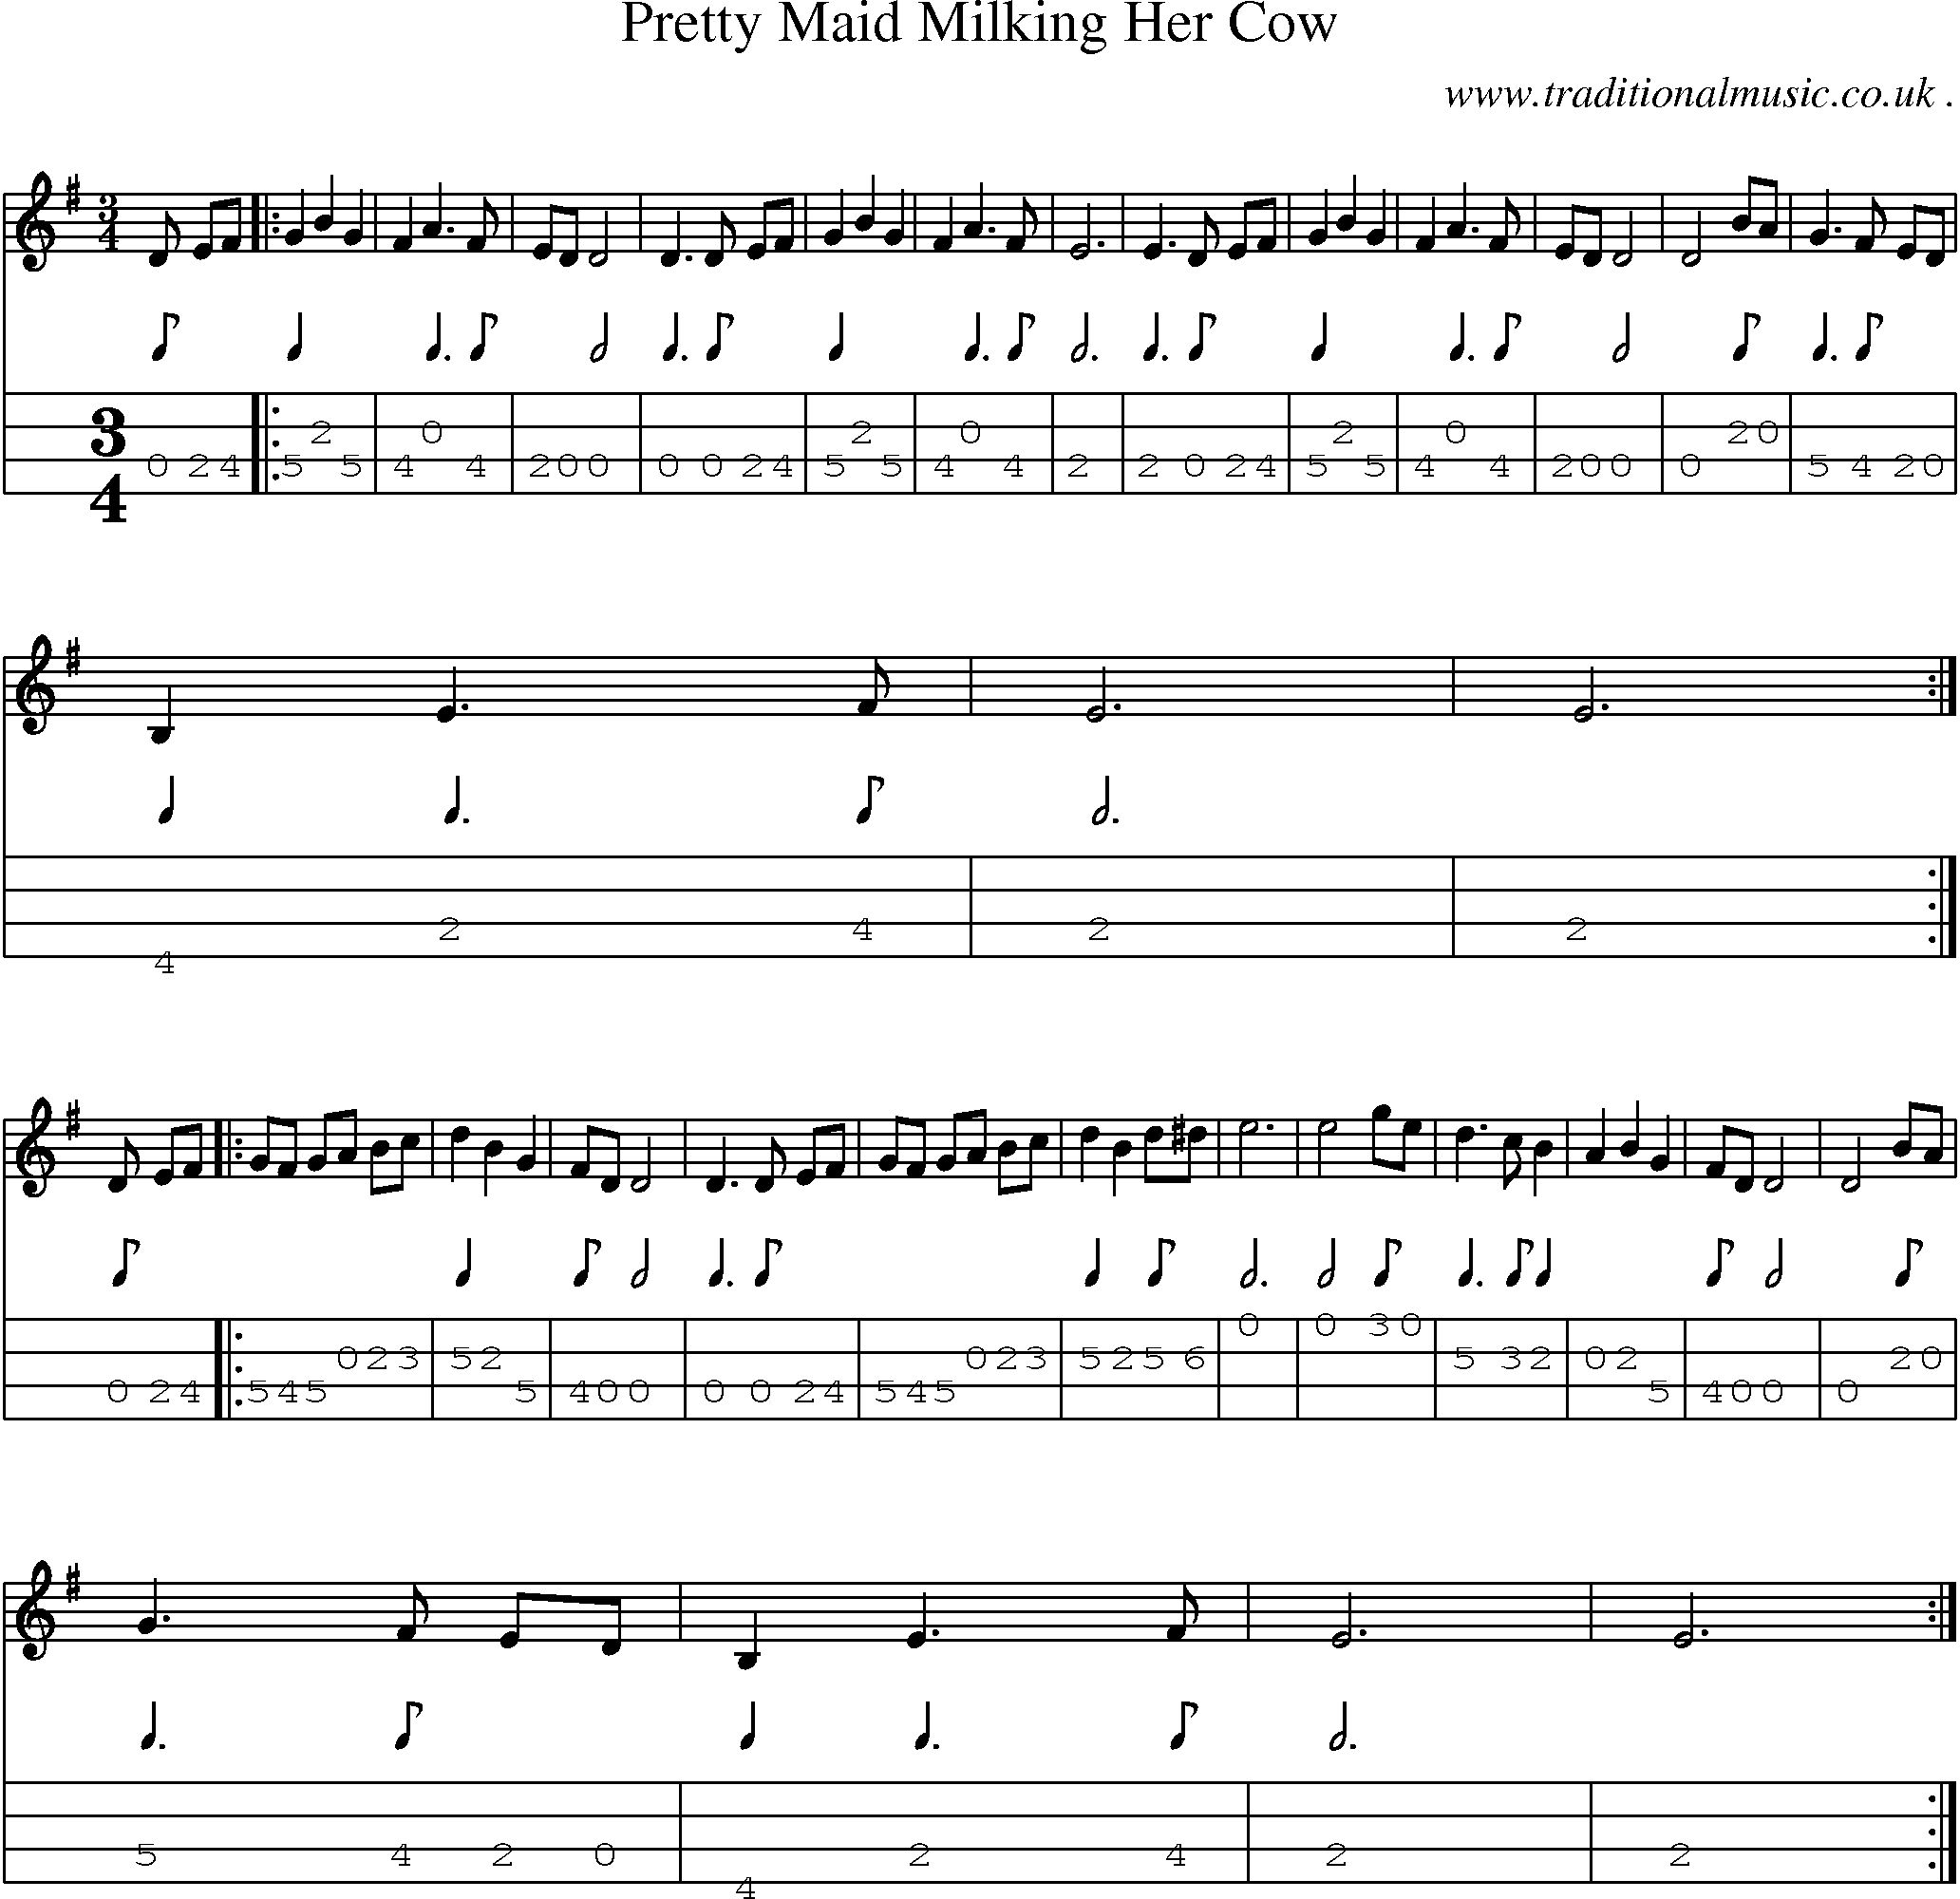 Sheet-Music and Mandolin Tabs for Pretty Maid Milking Her Cow